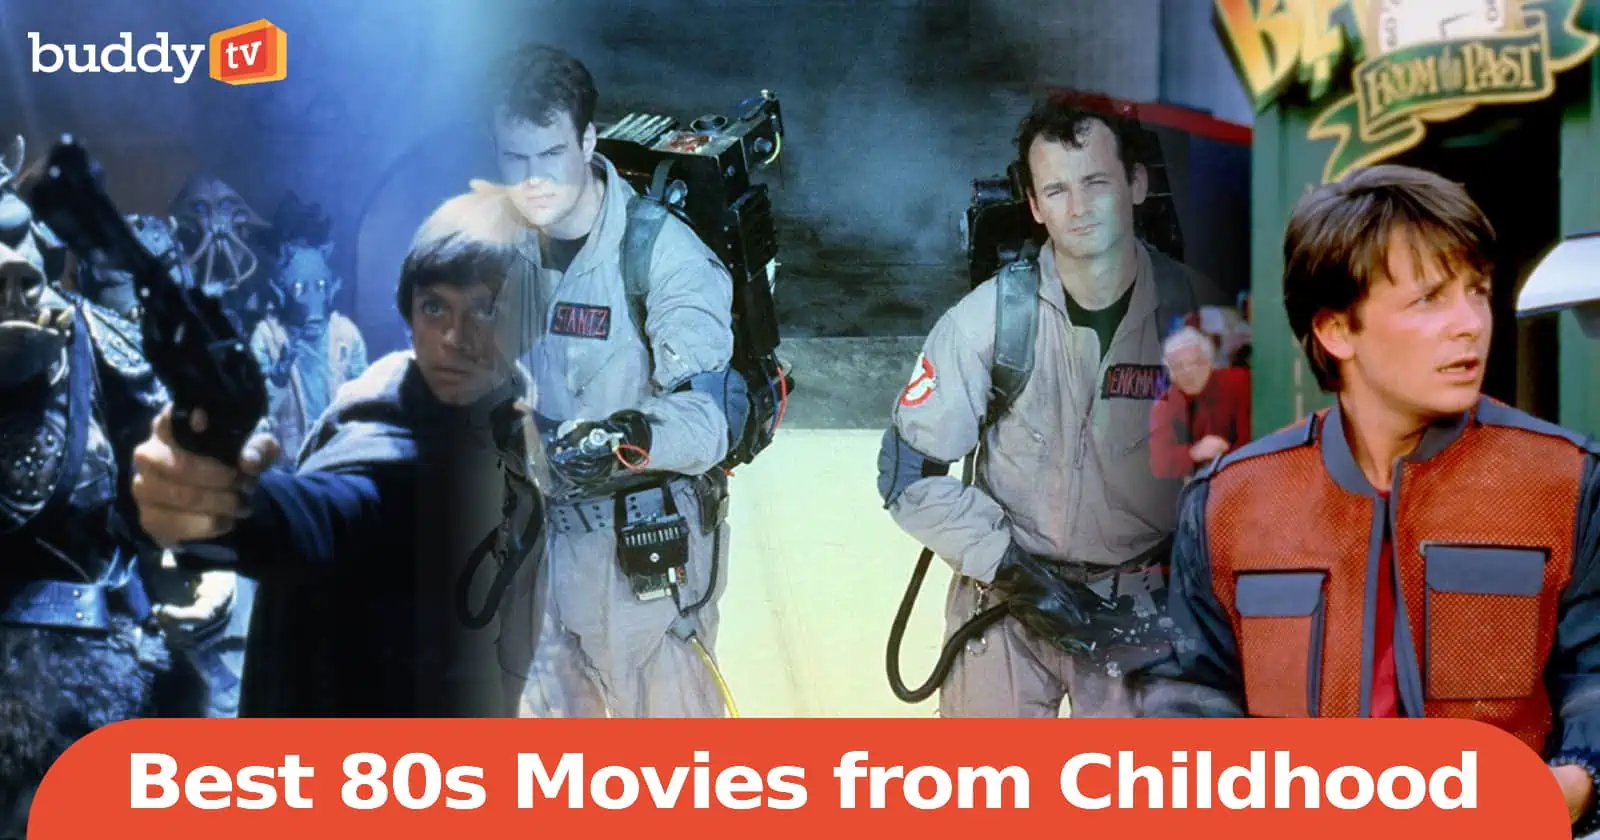 10 Best 80s Movies from Childhood, Ranked by Viewers